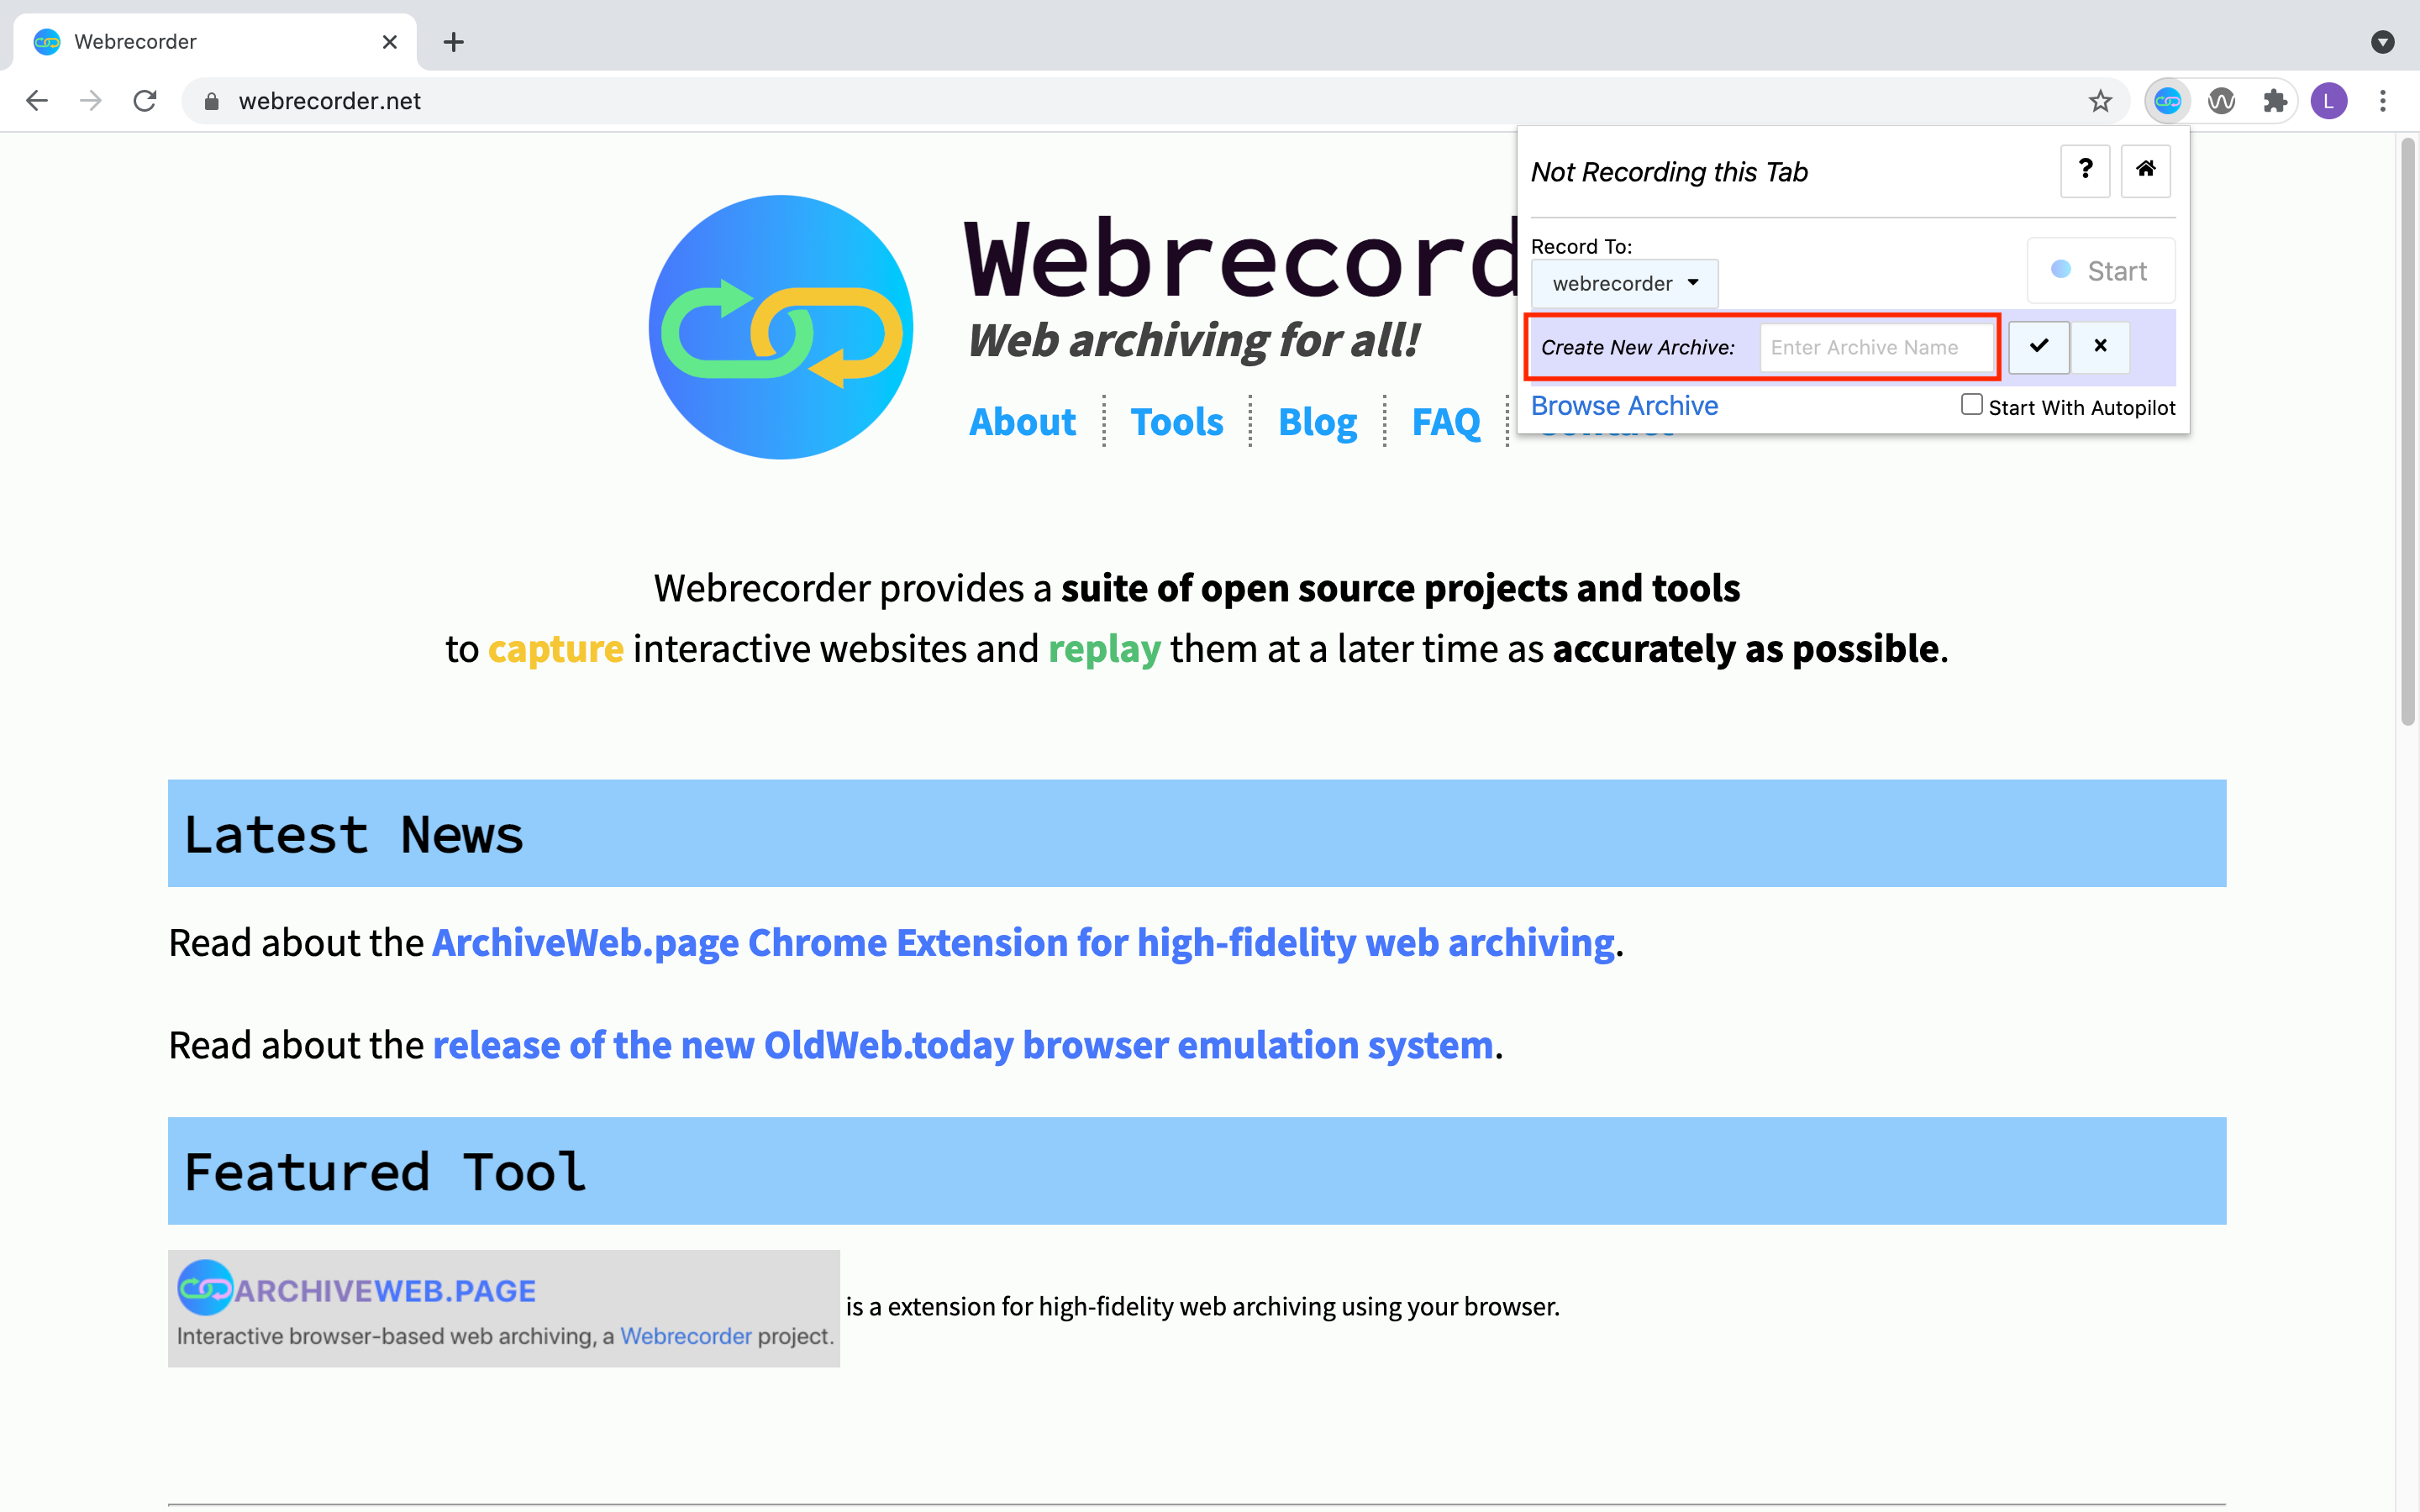 Screenshot of archiveweb.page's extension with the Create New Archive interface